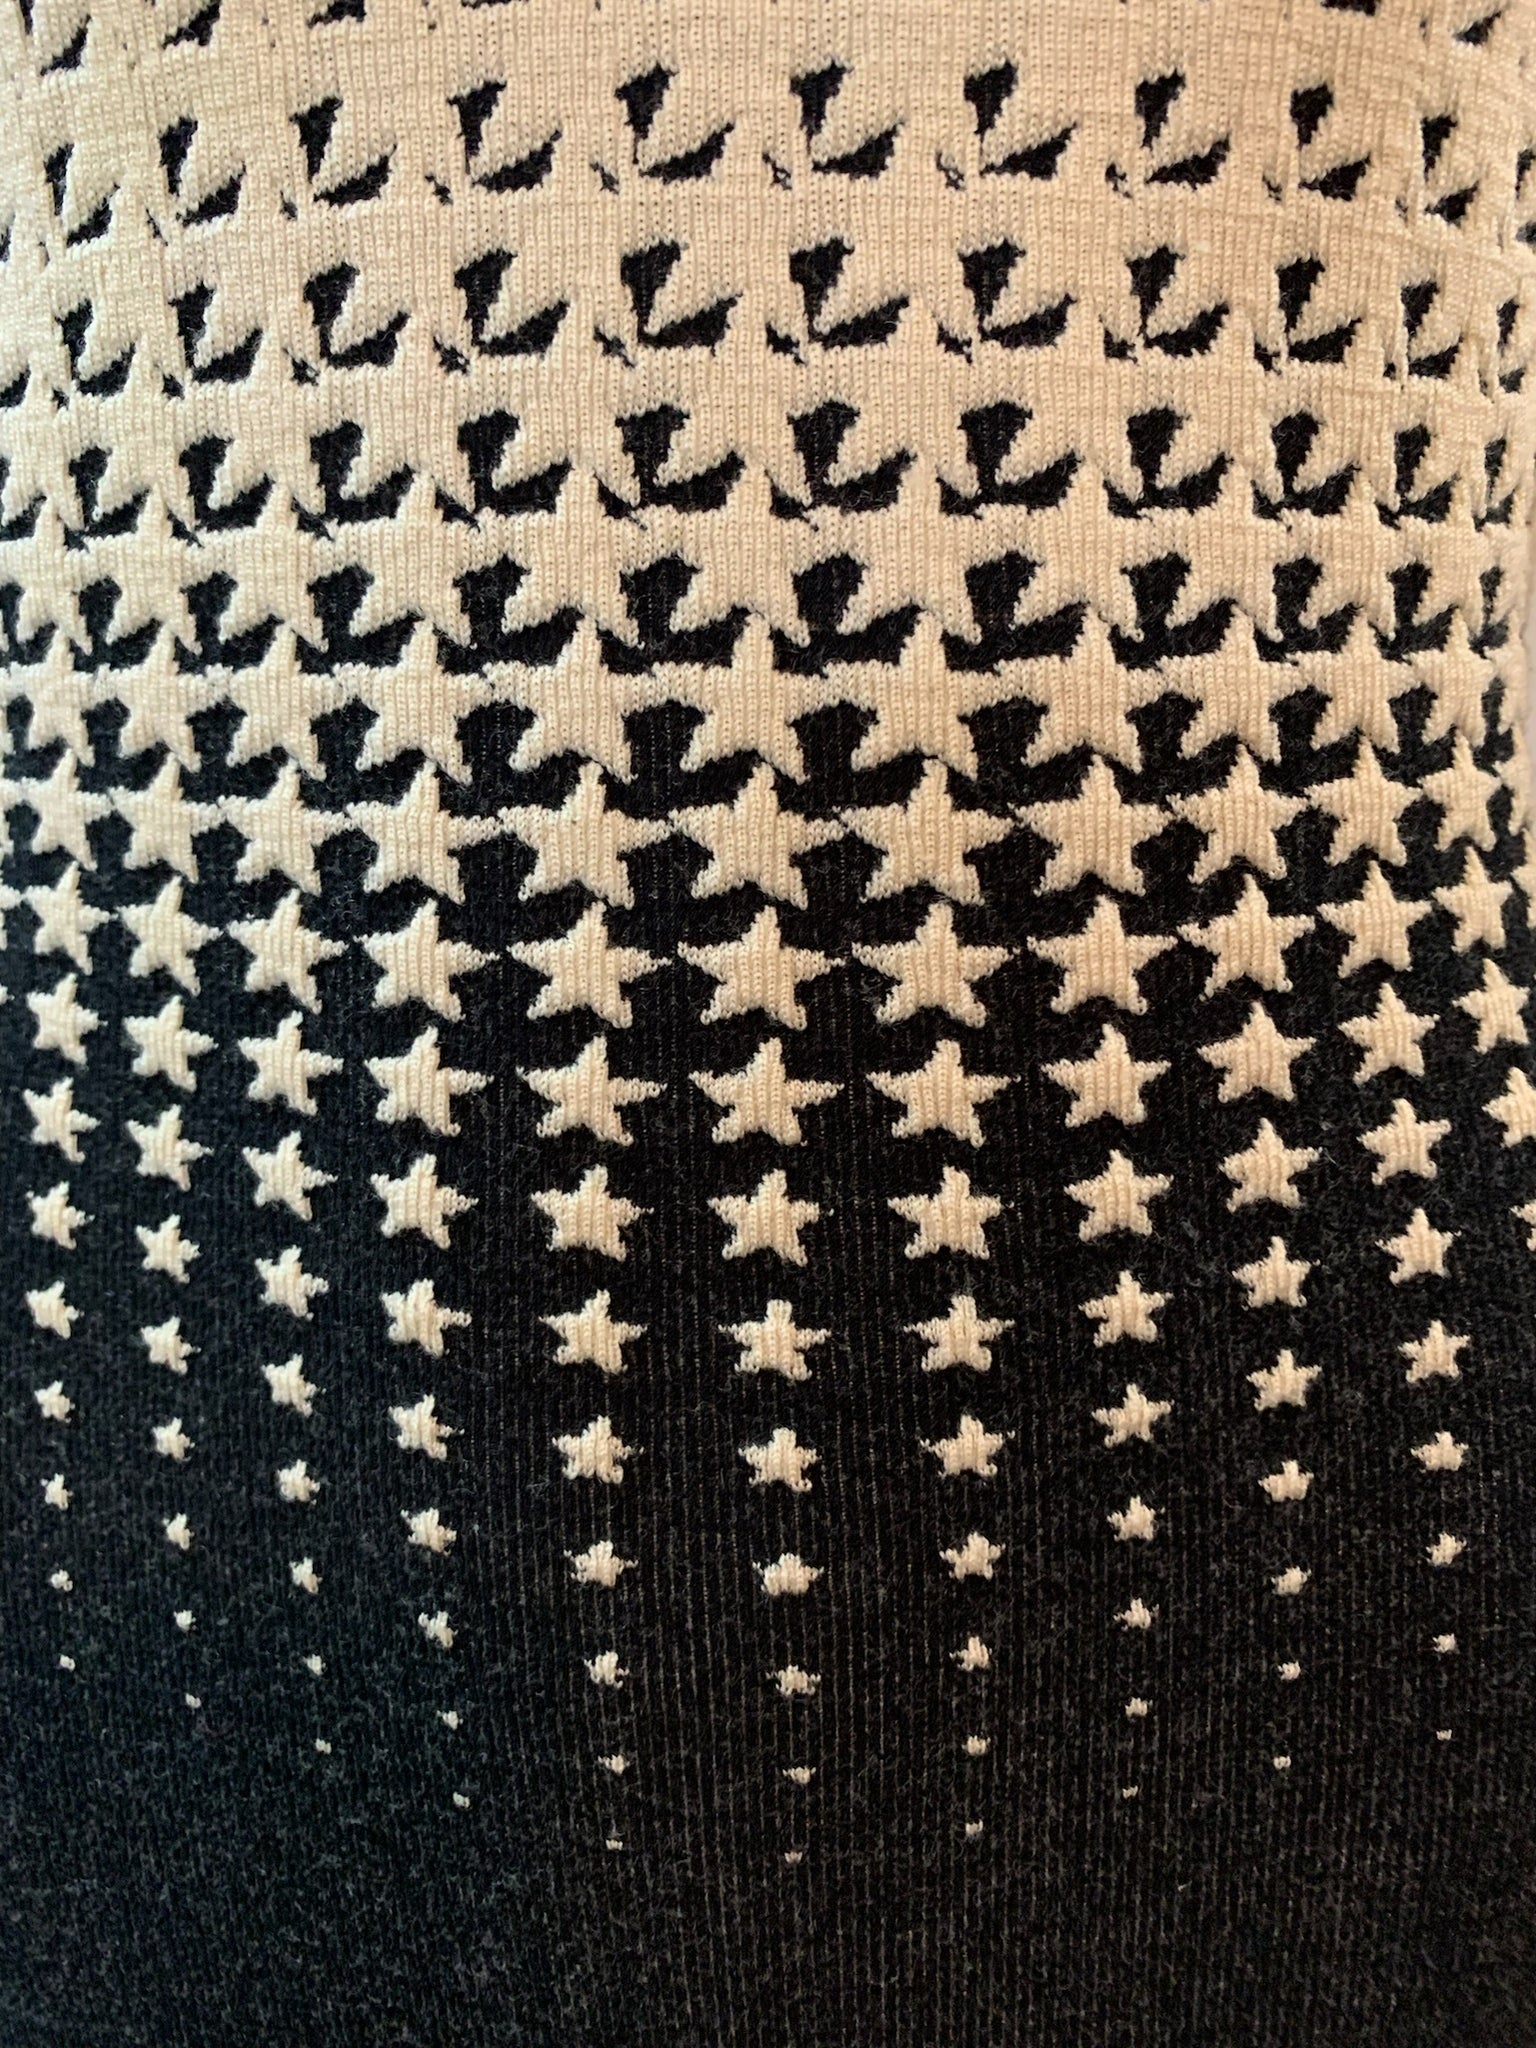  Thierry Mugler 90s Black and White Body Op Art Body Con Knit Dress DETAIL4 of 5